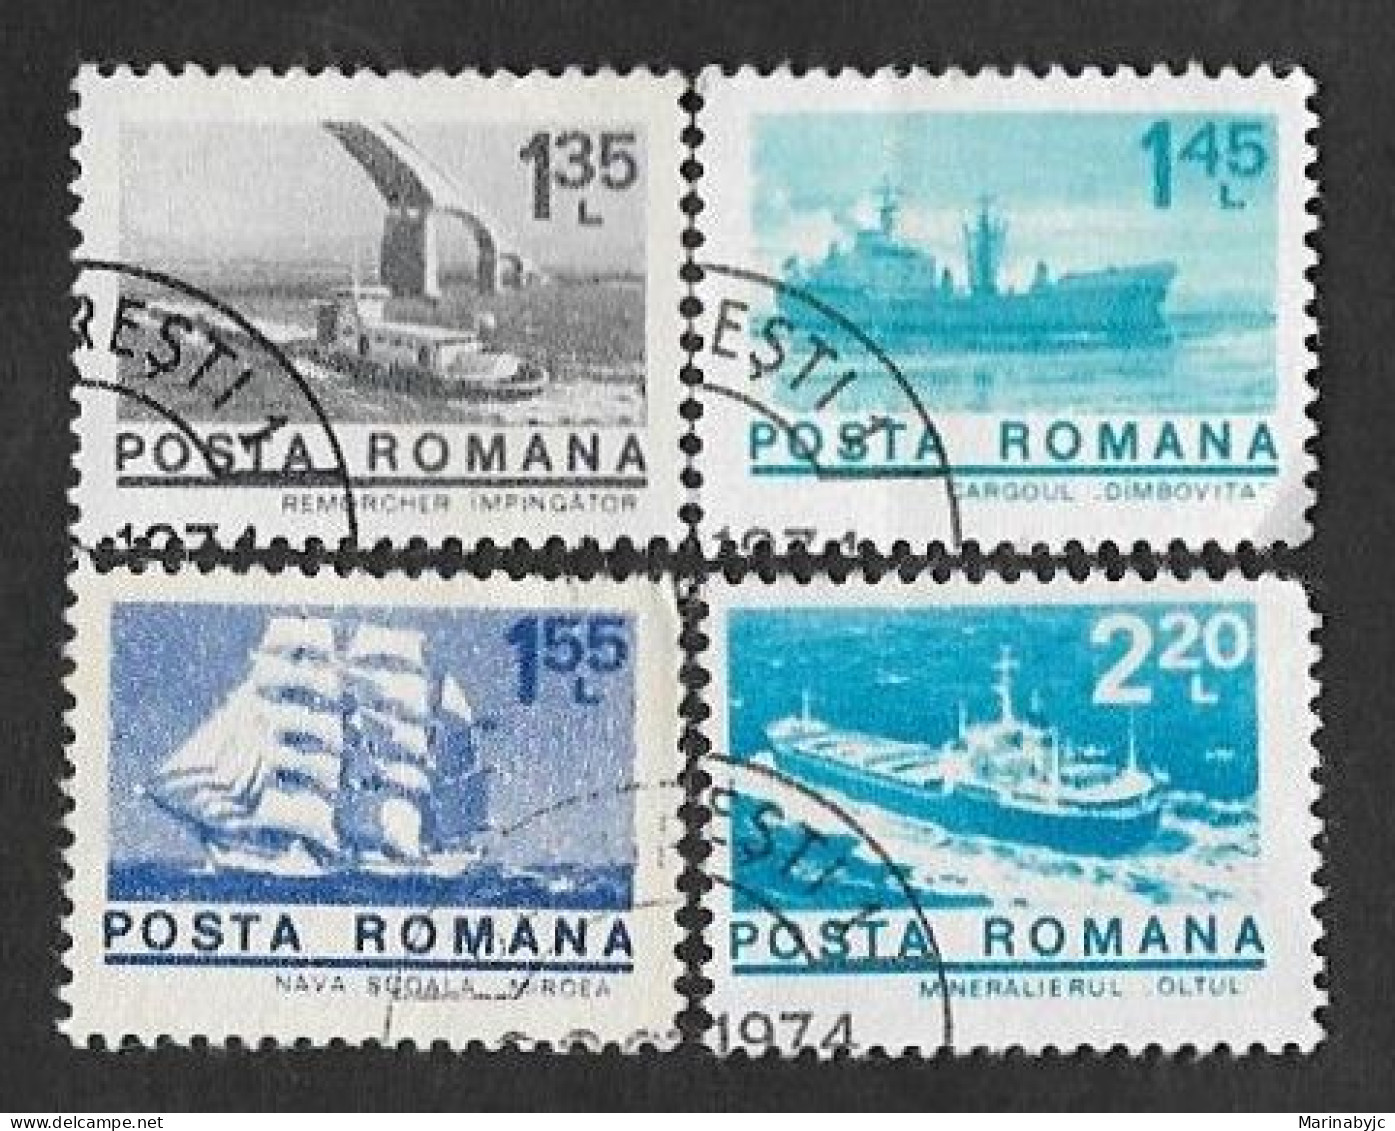 SE)1974 ROMANIA, SHORT SERIES BOATS, TUGBOAT, 4 STAMPS USED - Used Stamps